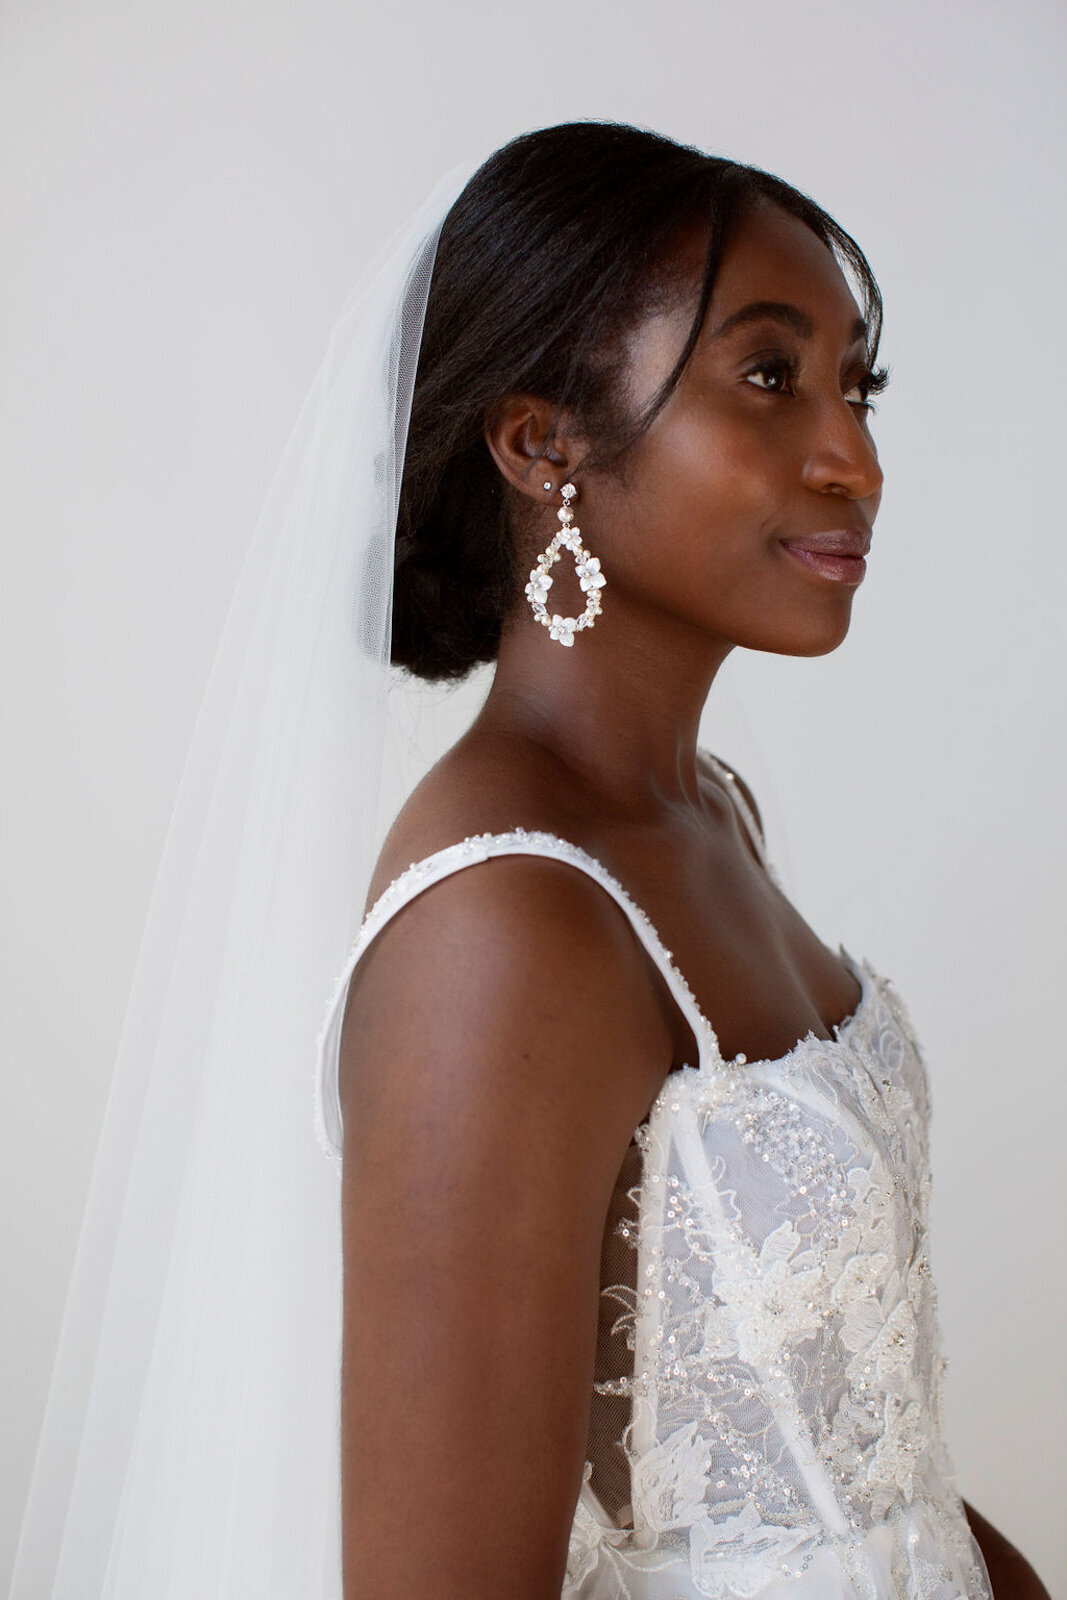 Elegant and unique bridal earrings, by Joanna Bisley Designs, romantic and modern wedding jewelry based in Calgary, Alberta. Featured on the Brontë Bride Vendor Guide.